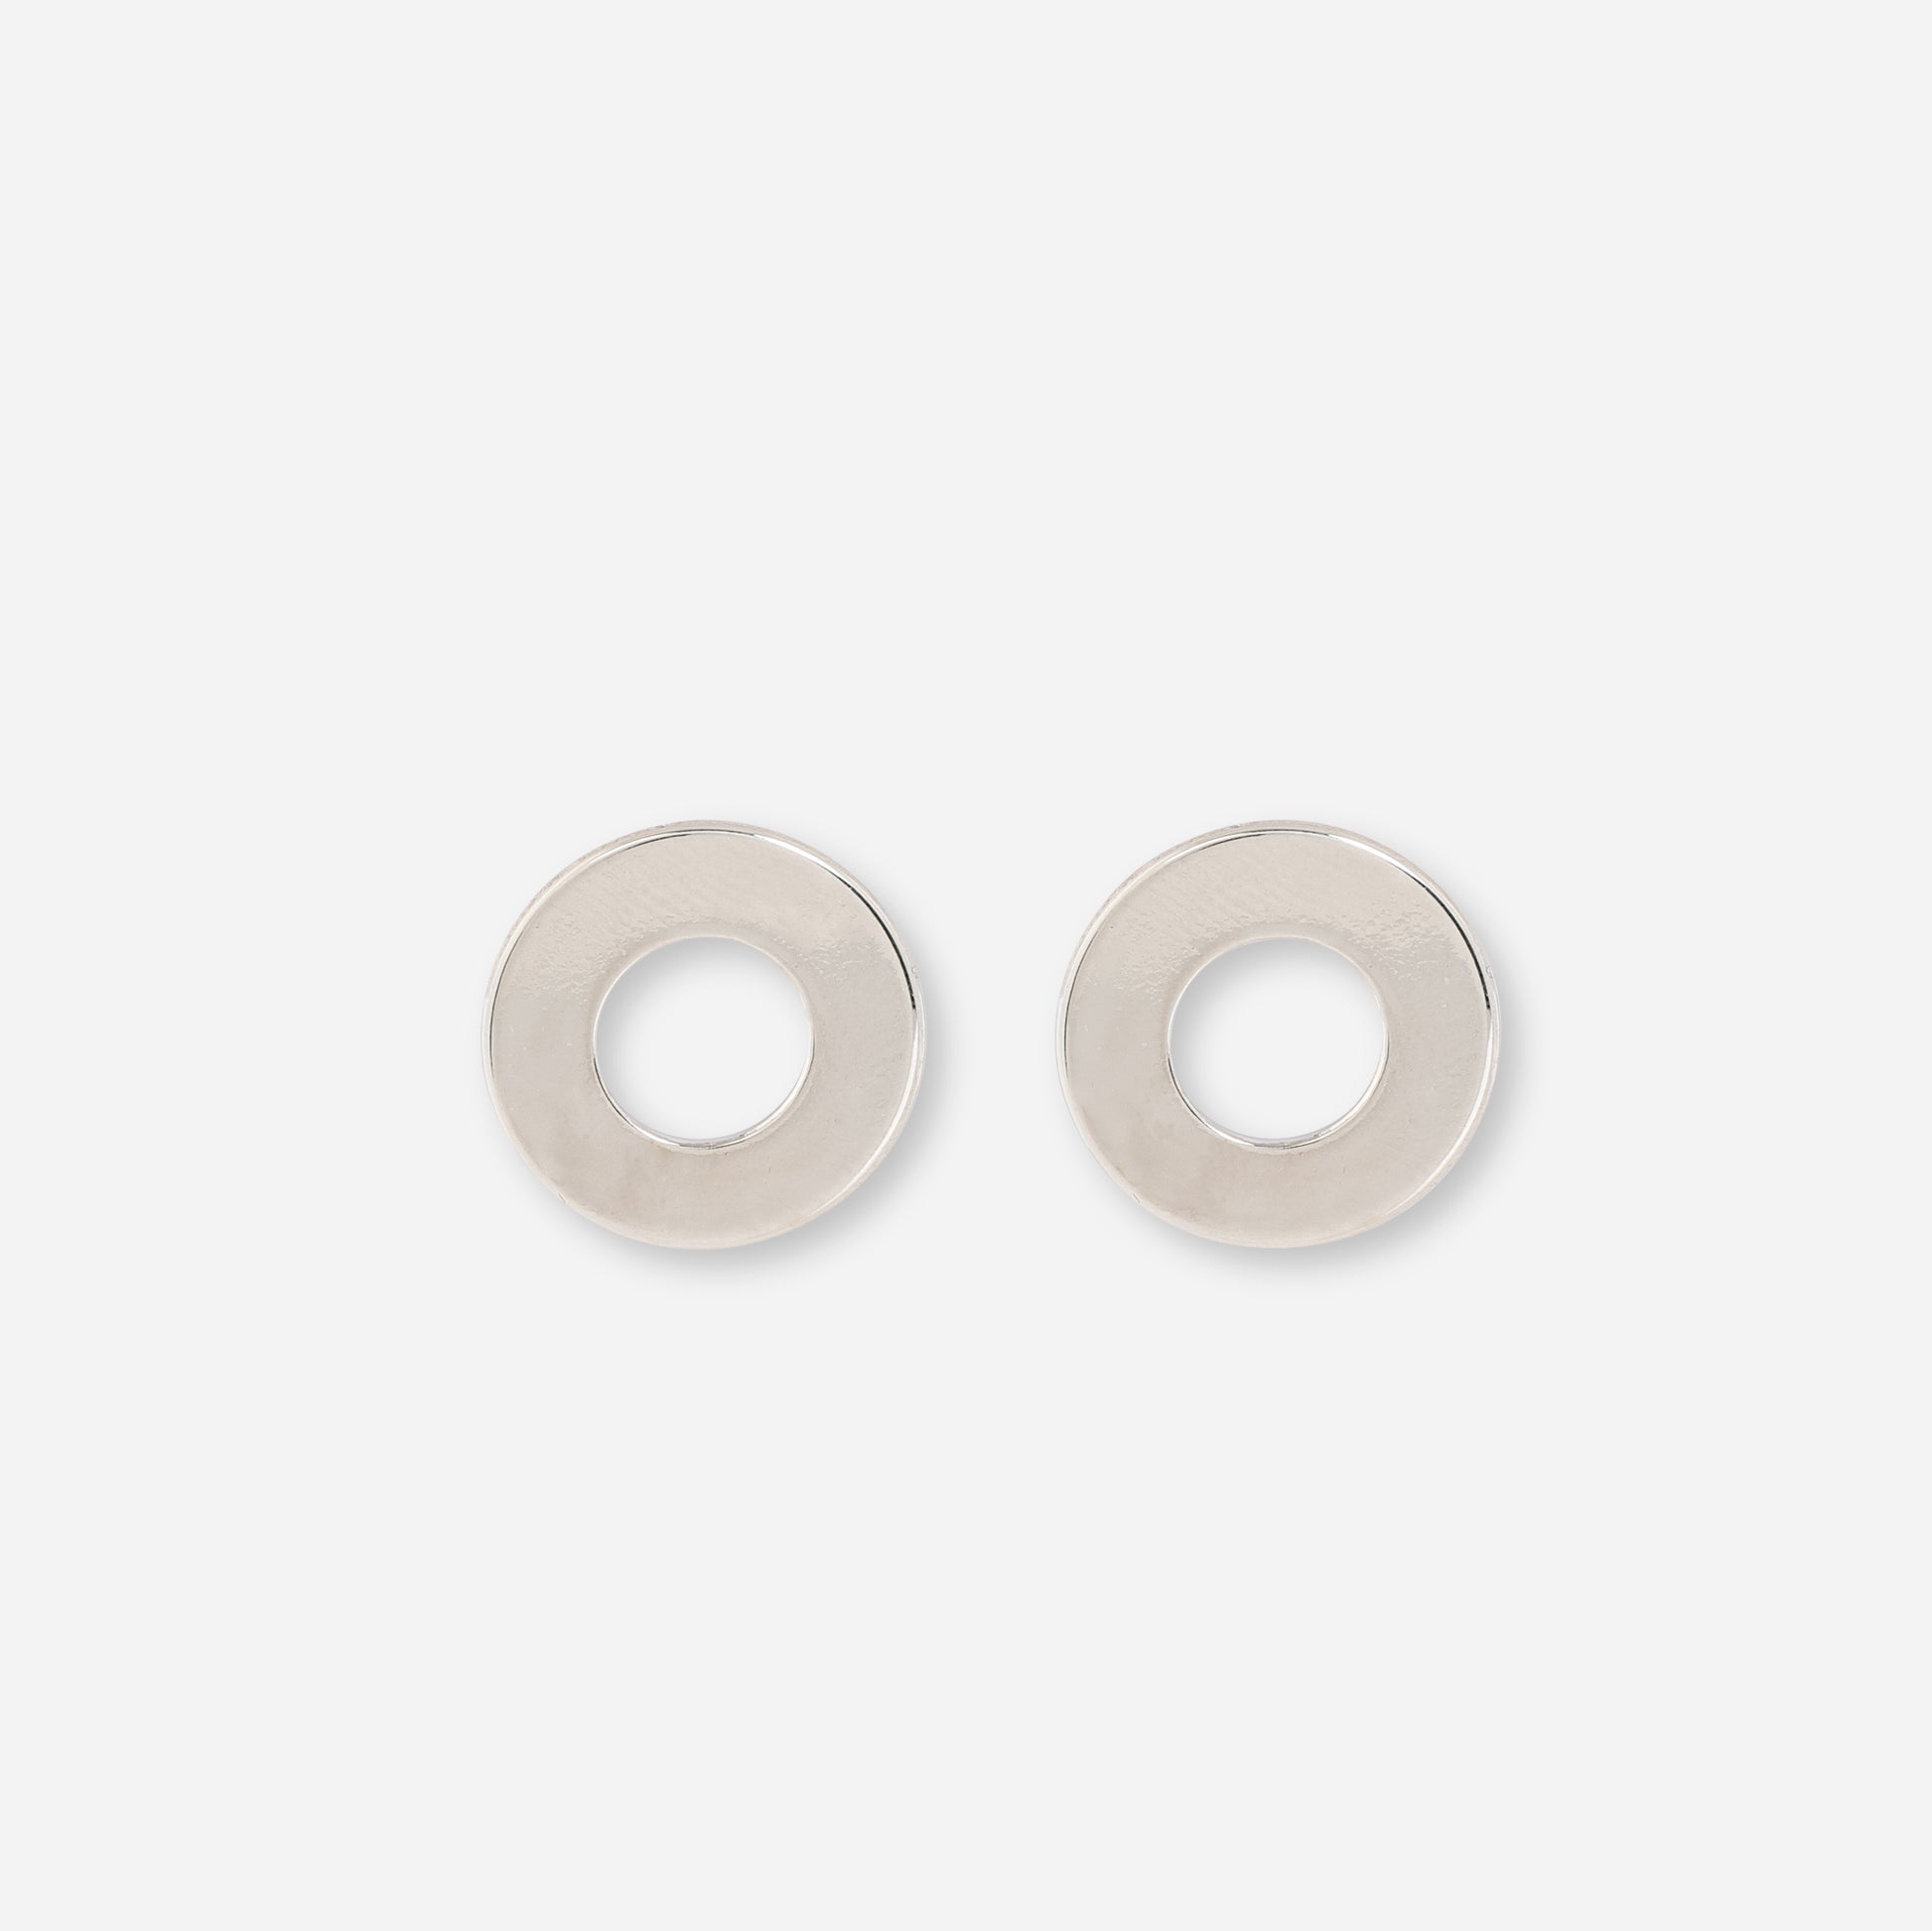 Silver circular stud earrings offer classic and versatile accessory option. 